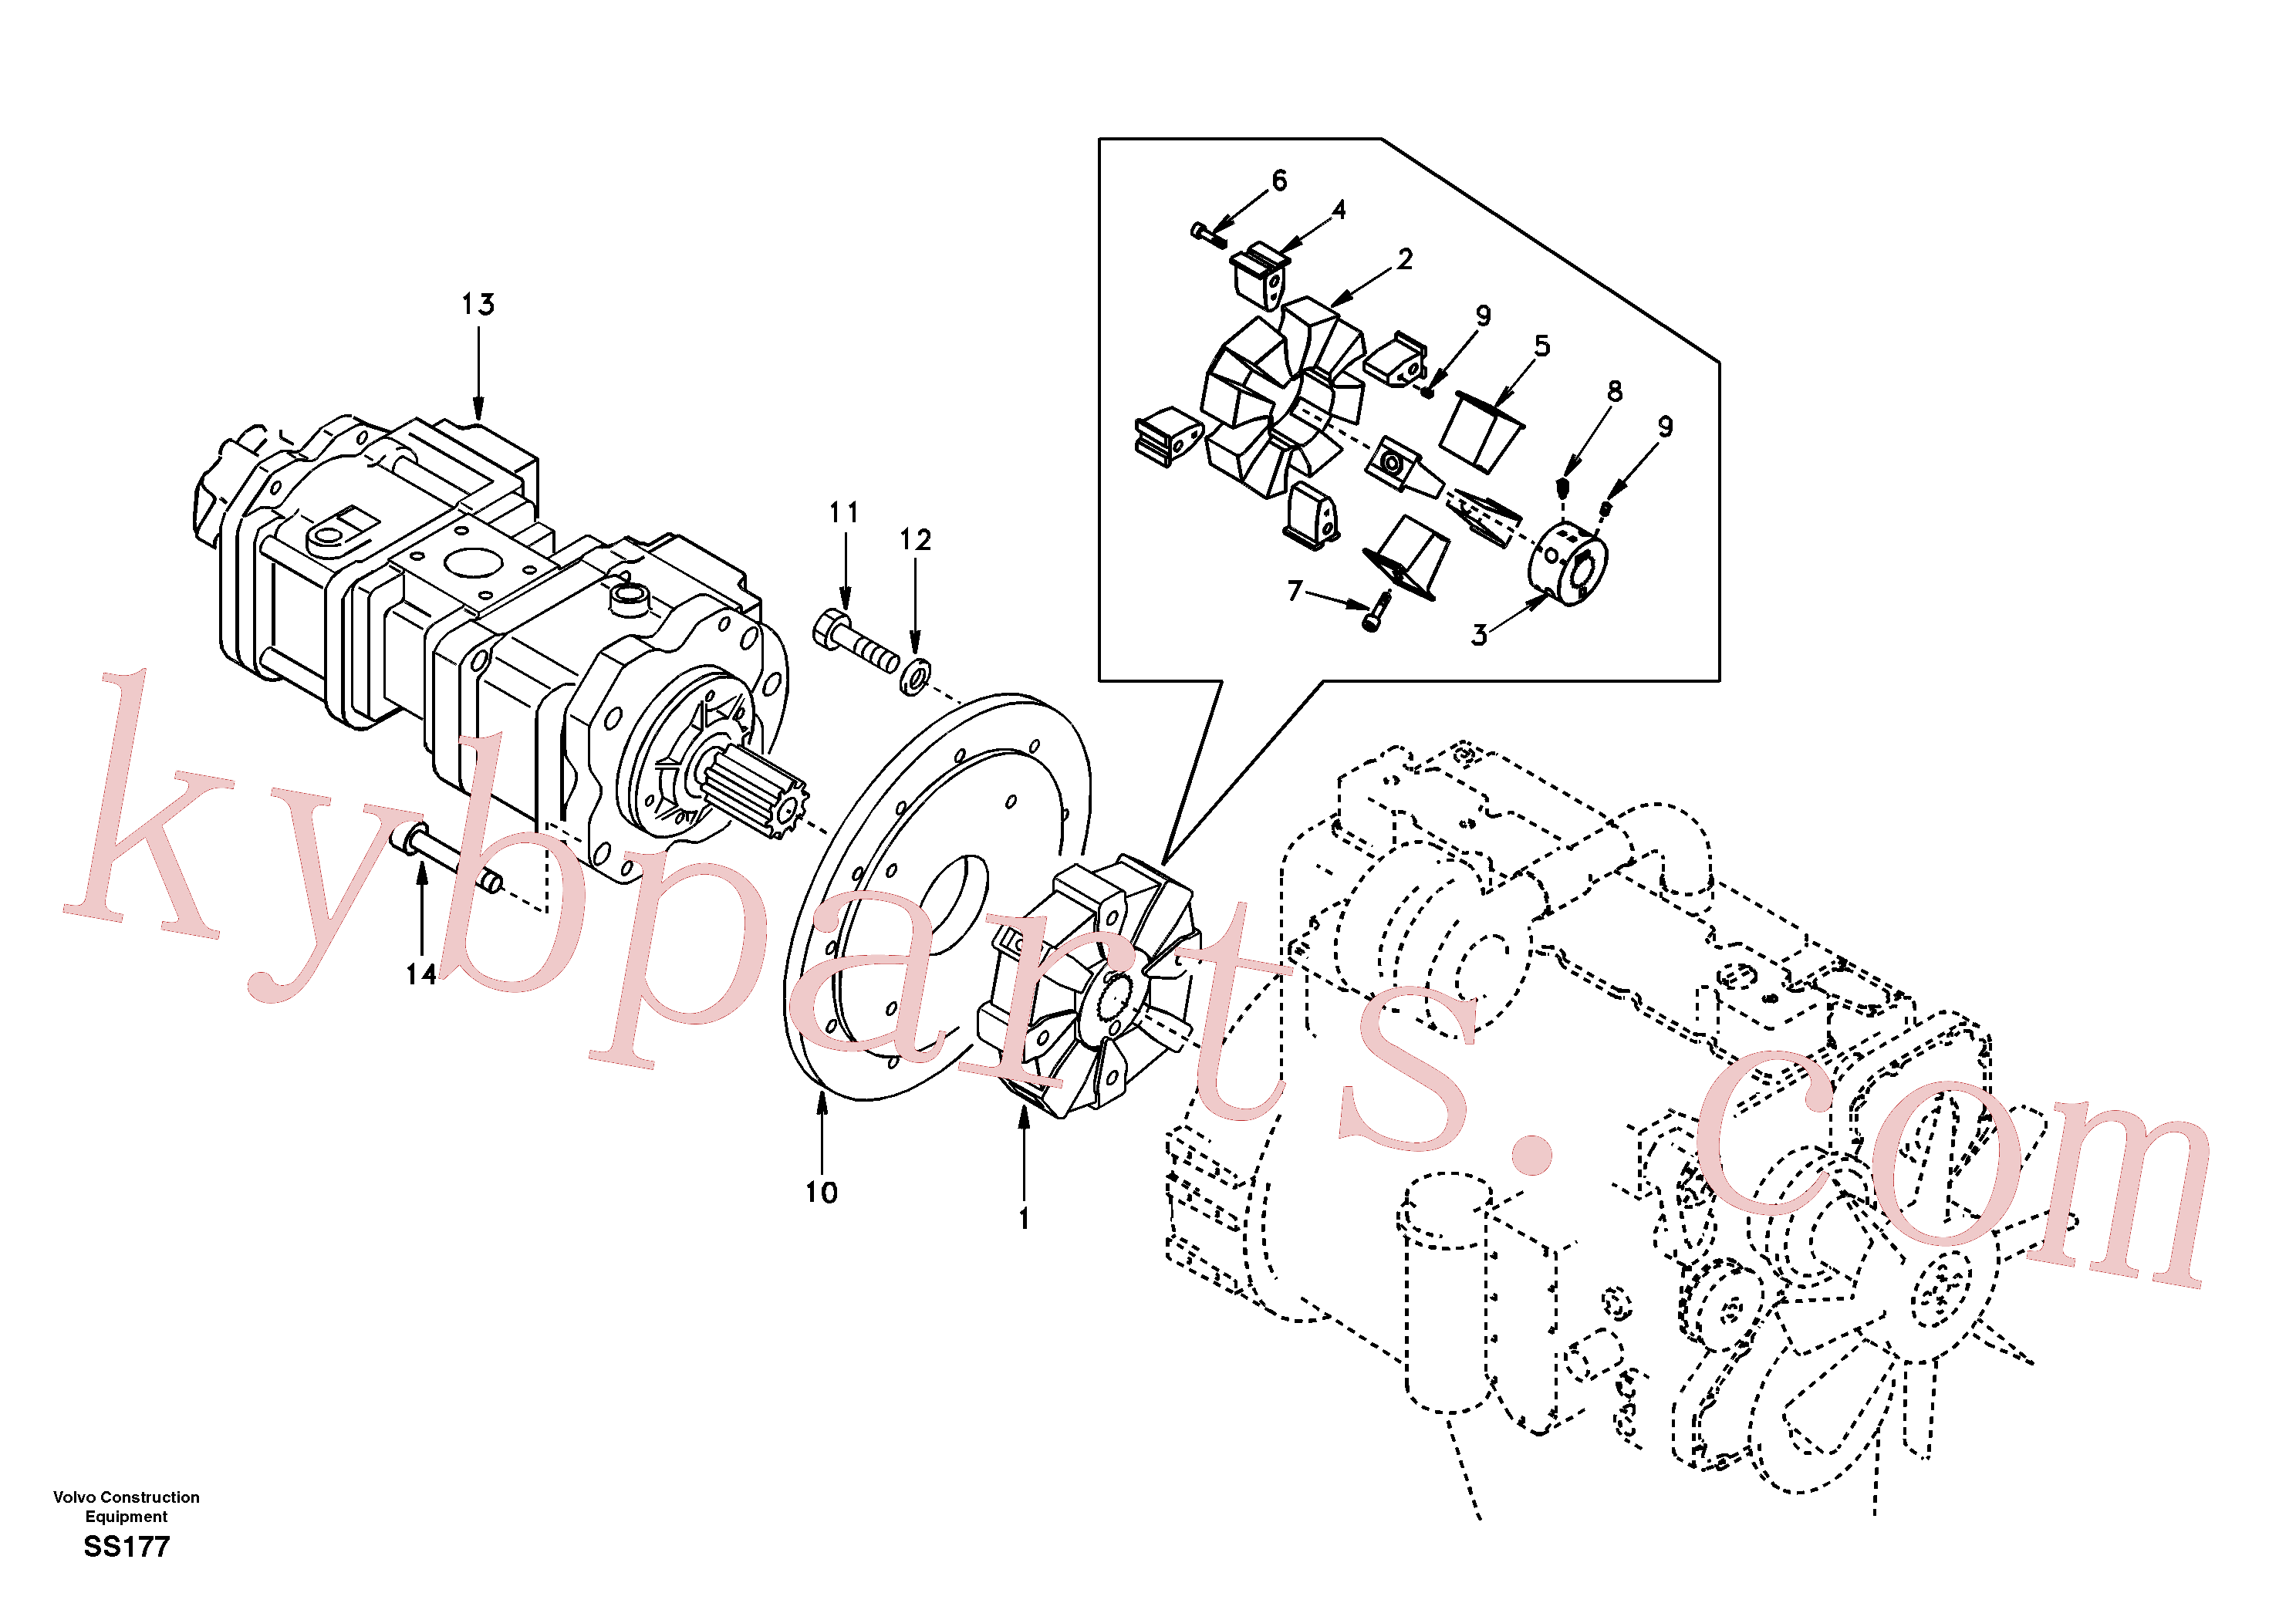 SA1012-01350 for Volvo Pump gearbox with assembling parts(SS177 assembly)